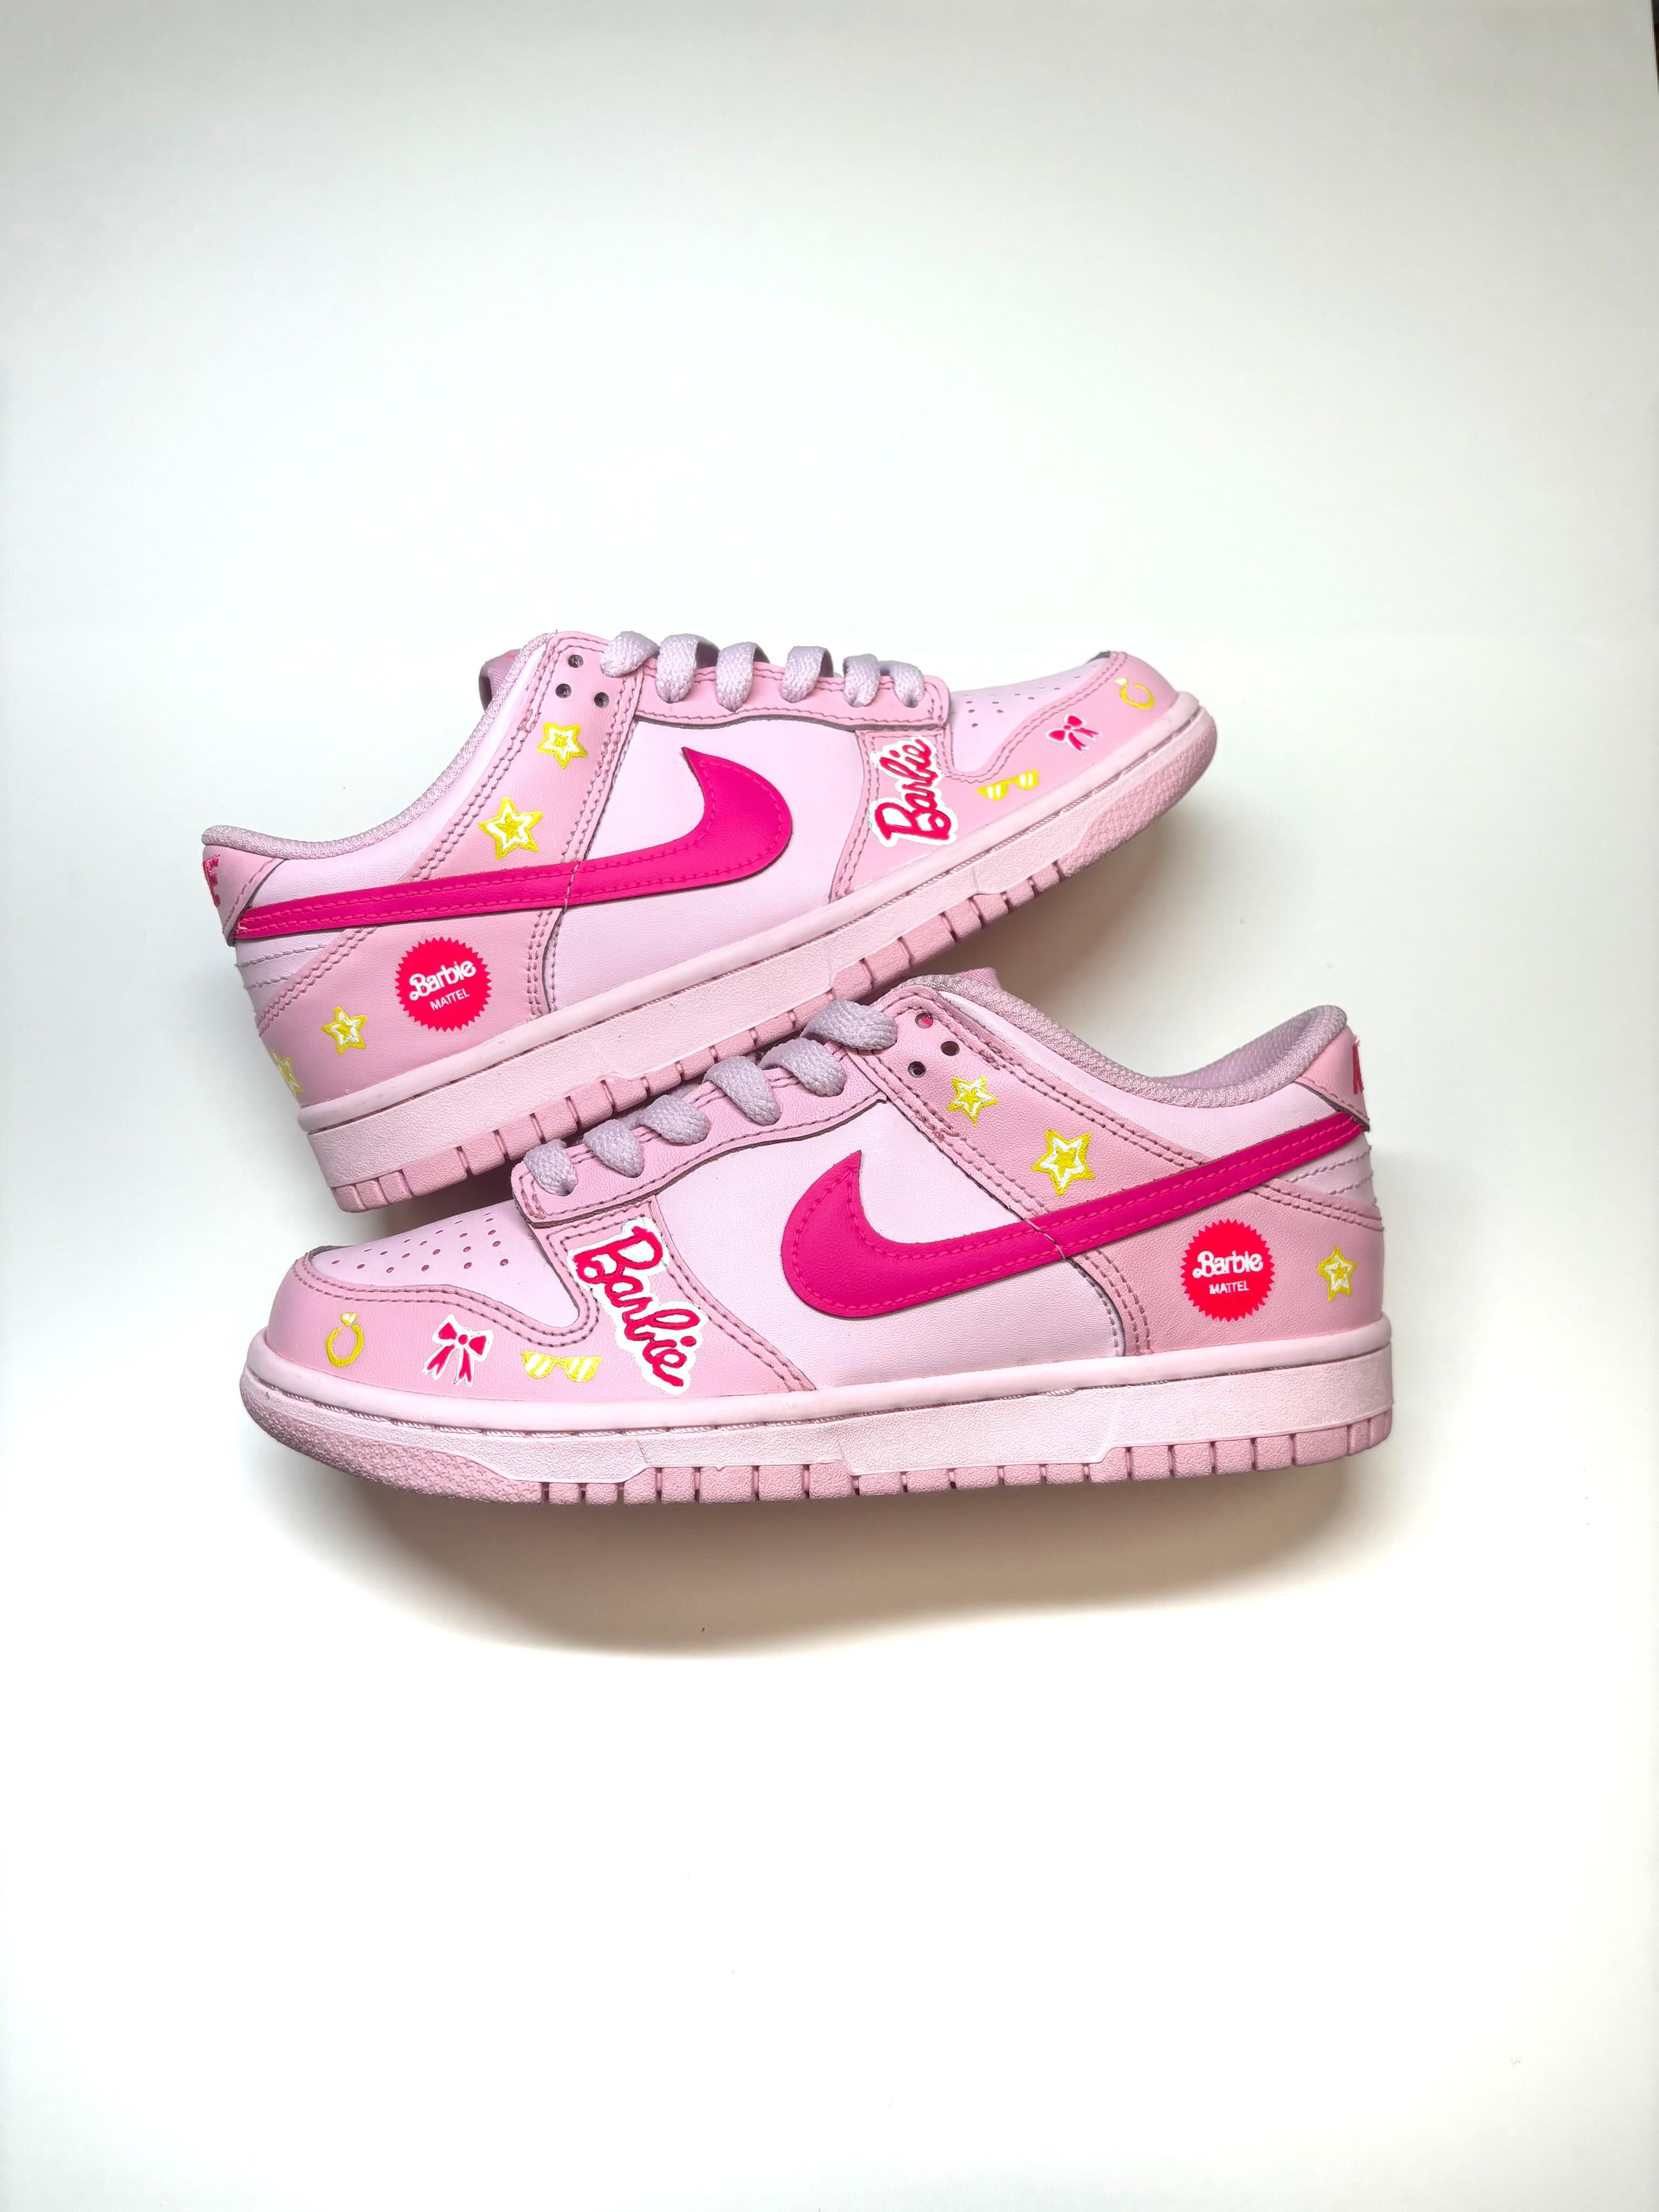 Barbie Custom Hand-Painted Nike Dunk Concept Sneakers by Reed Revesz For Sale 2